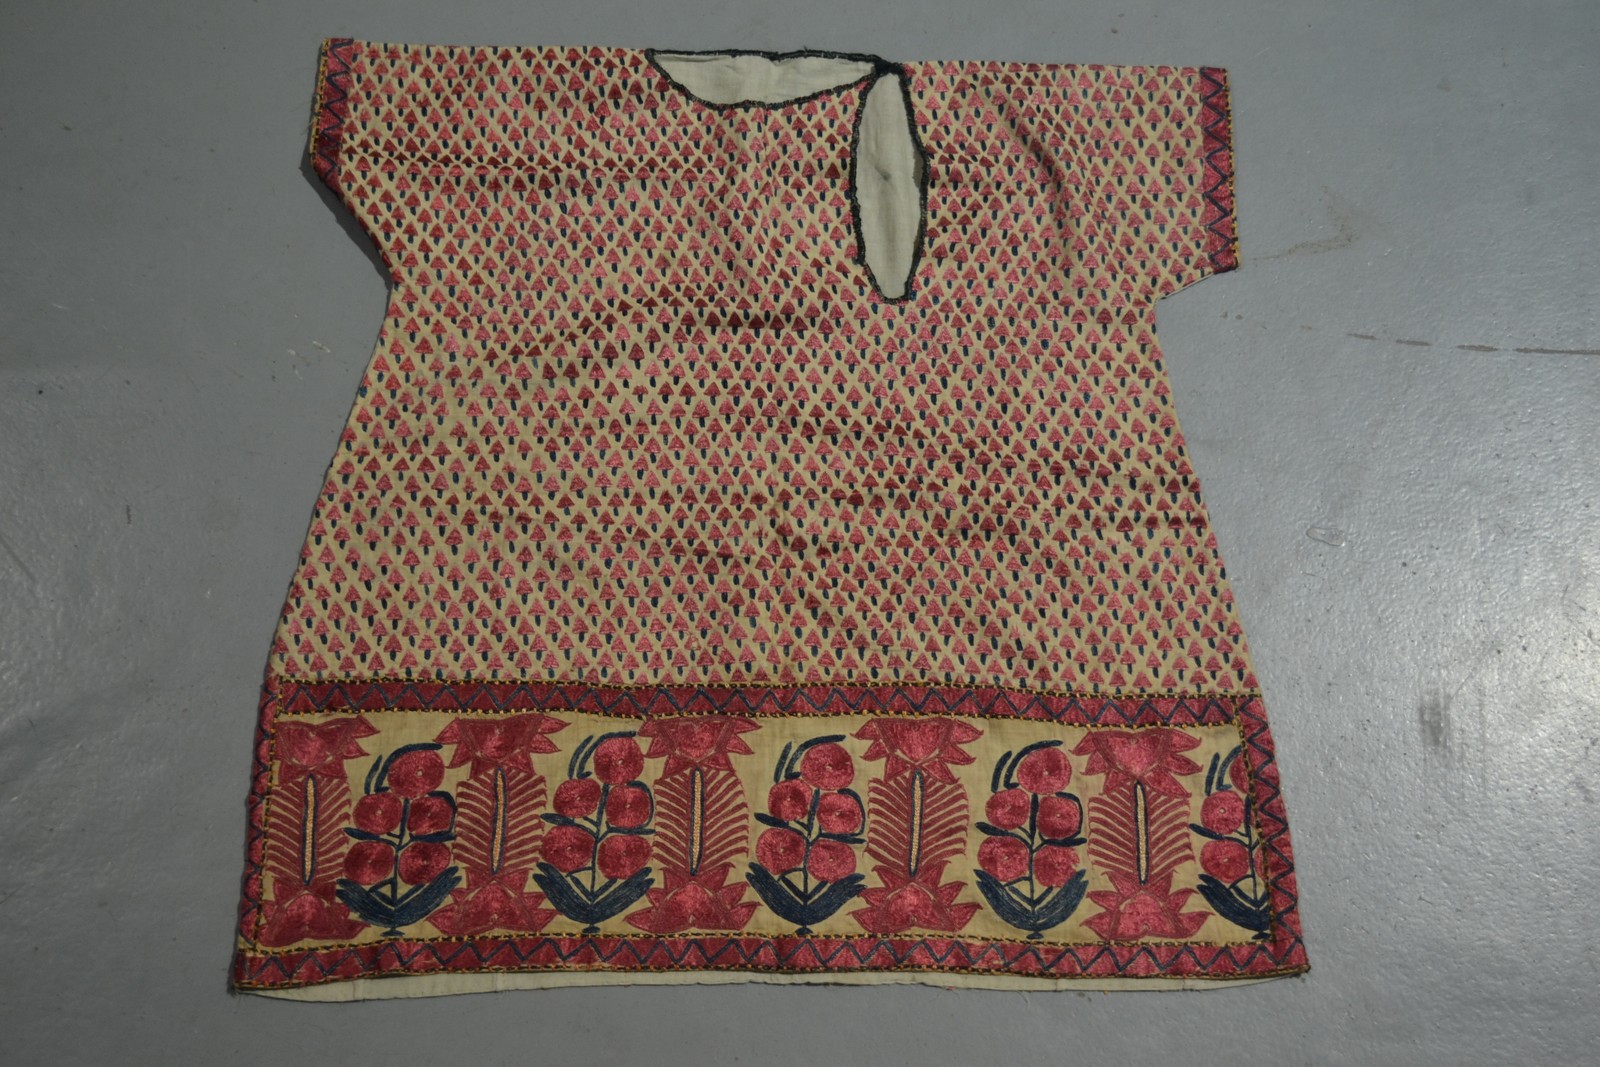 Attractive Sindhi woman's short sleeve top, Sindh, north west India, early 20th century, silk ground